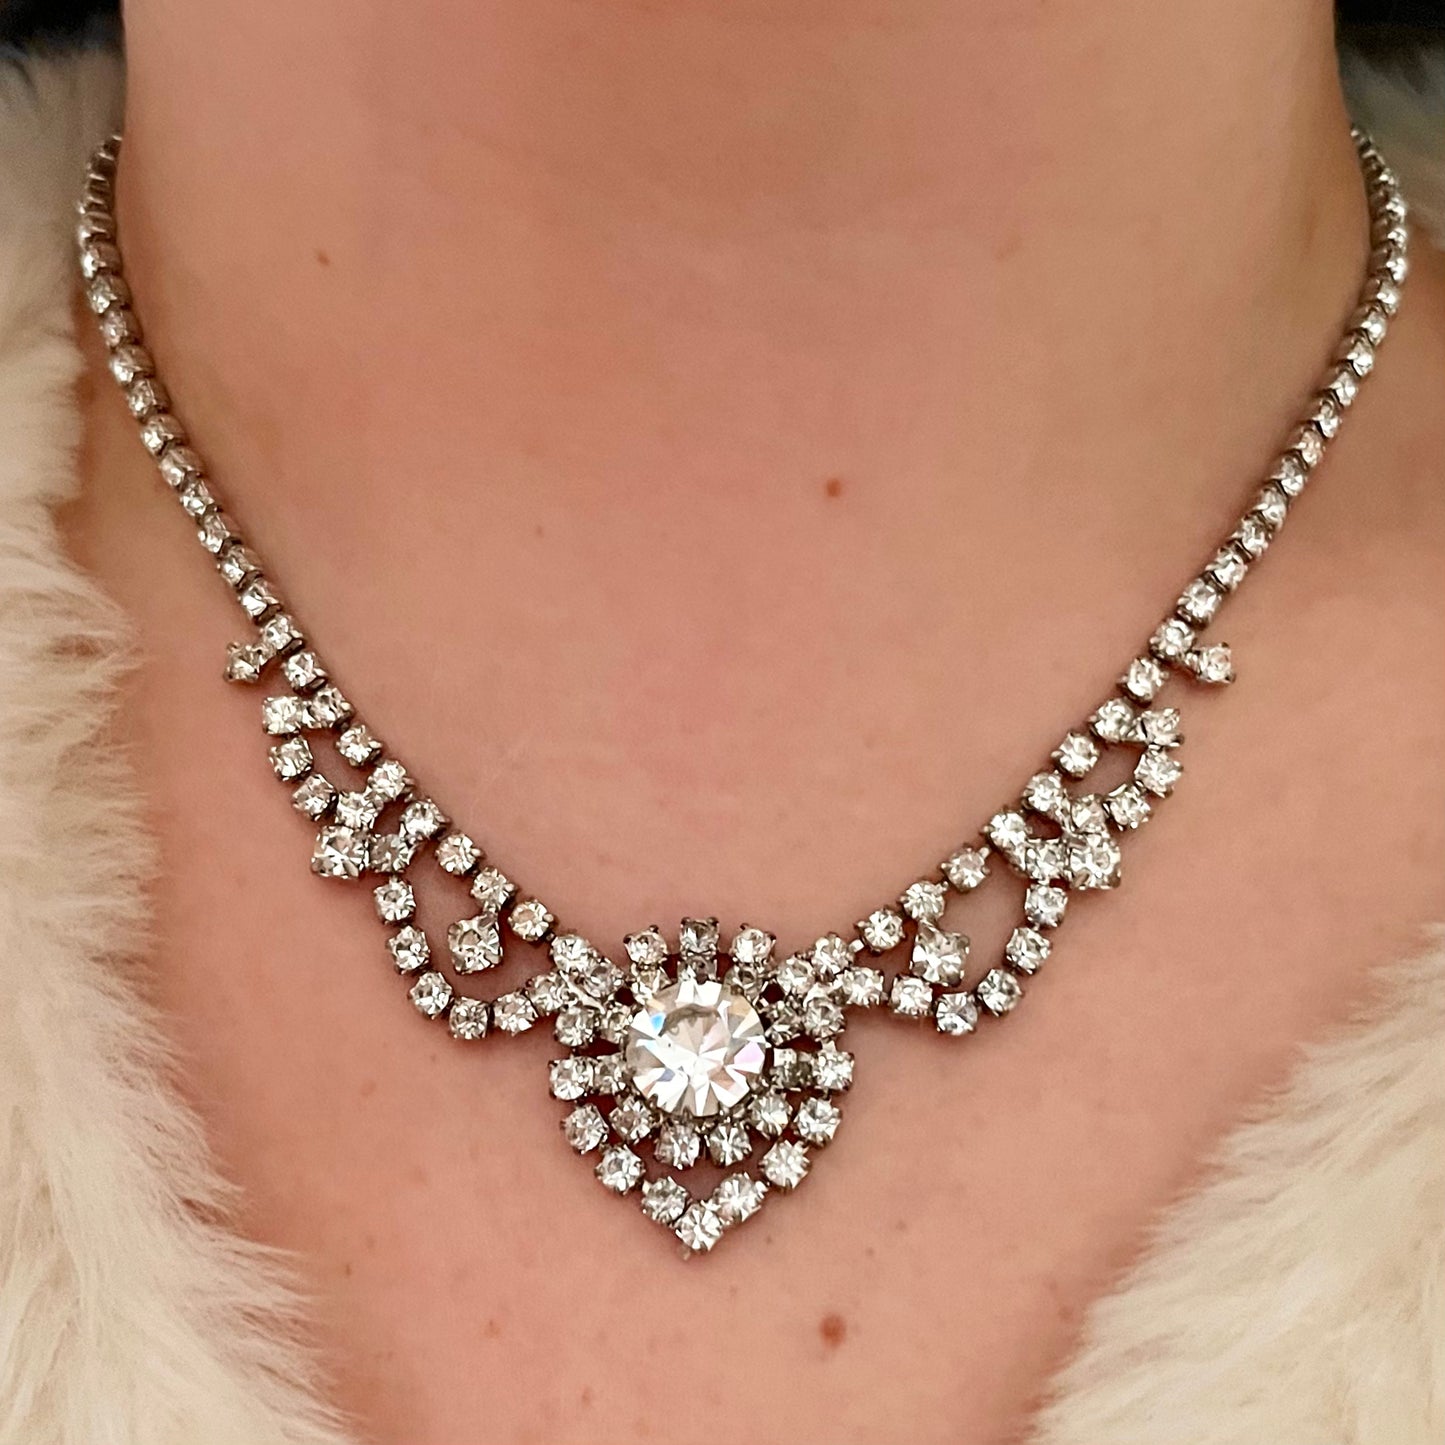 1950s Beautiful Sparkly Silver Tone Statement Necklace